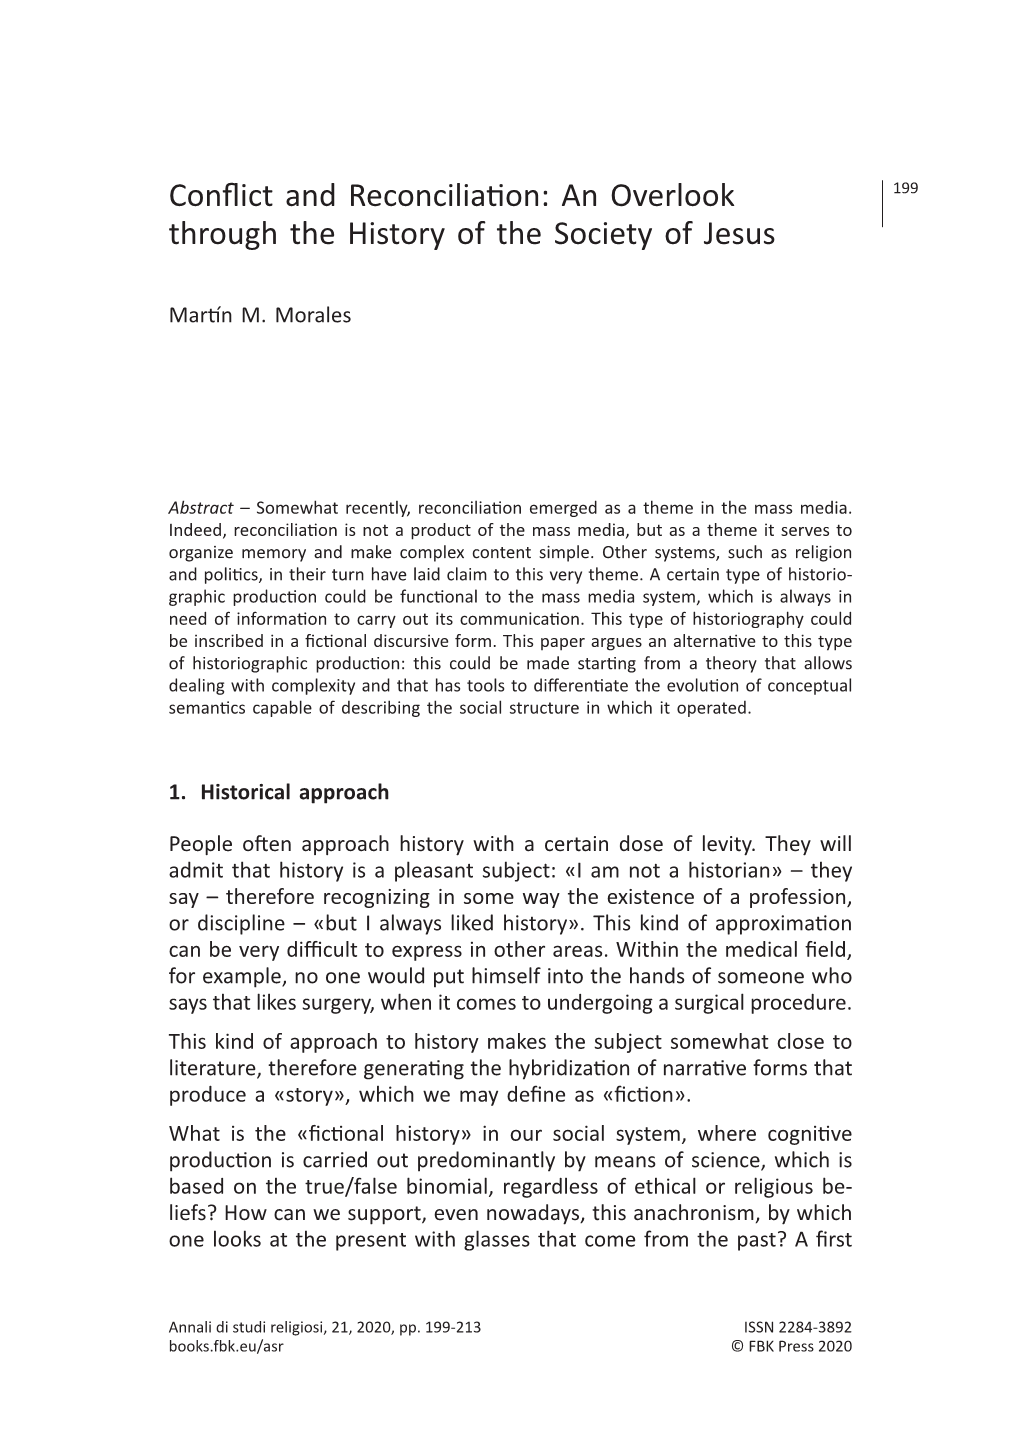 Conflict and Reconciliation: an Overlook 199 Through the History of the Society of Jesus